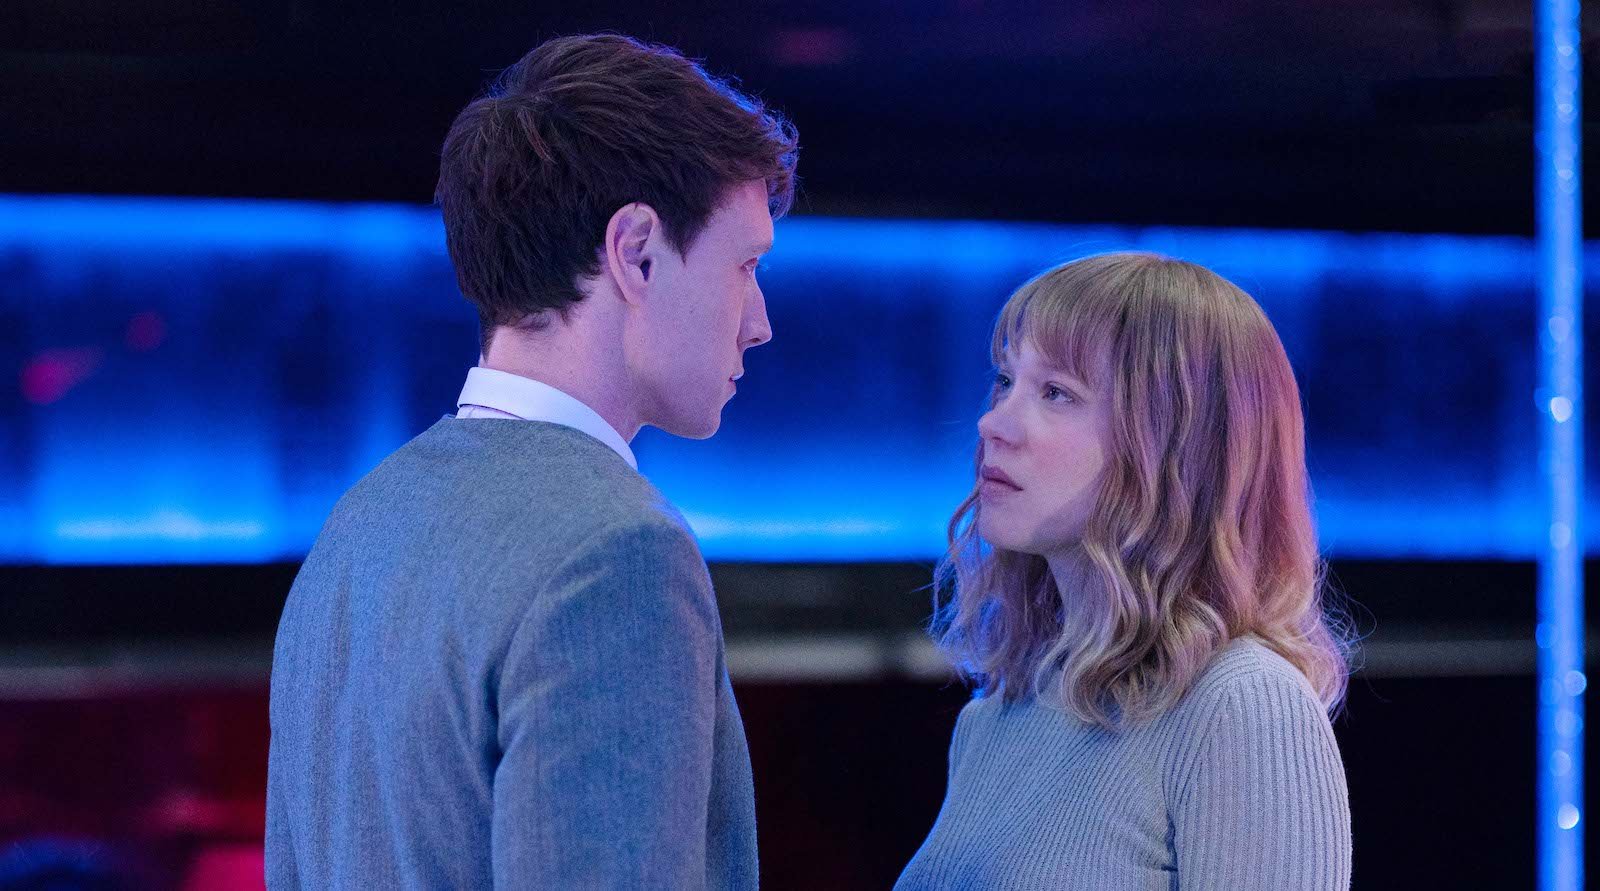 A long-blonde-haired woman in a gray sweater looks up at a man with short dark hair in a gray suit in a modern-looking room with blue neon lights